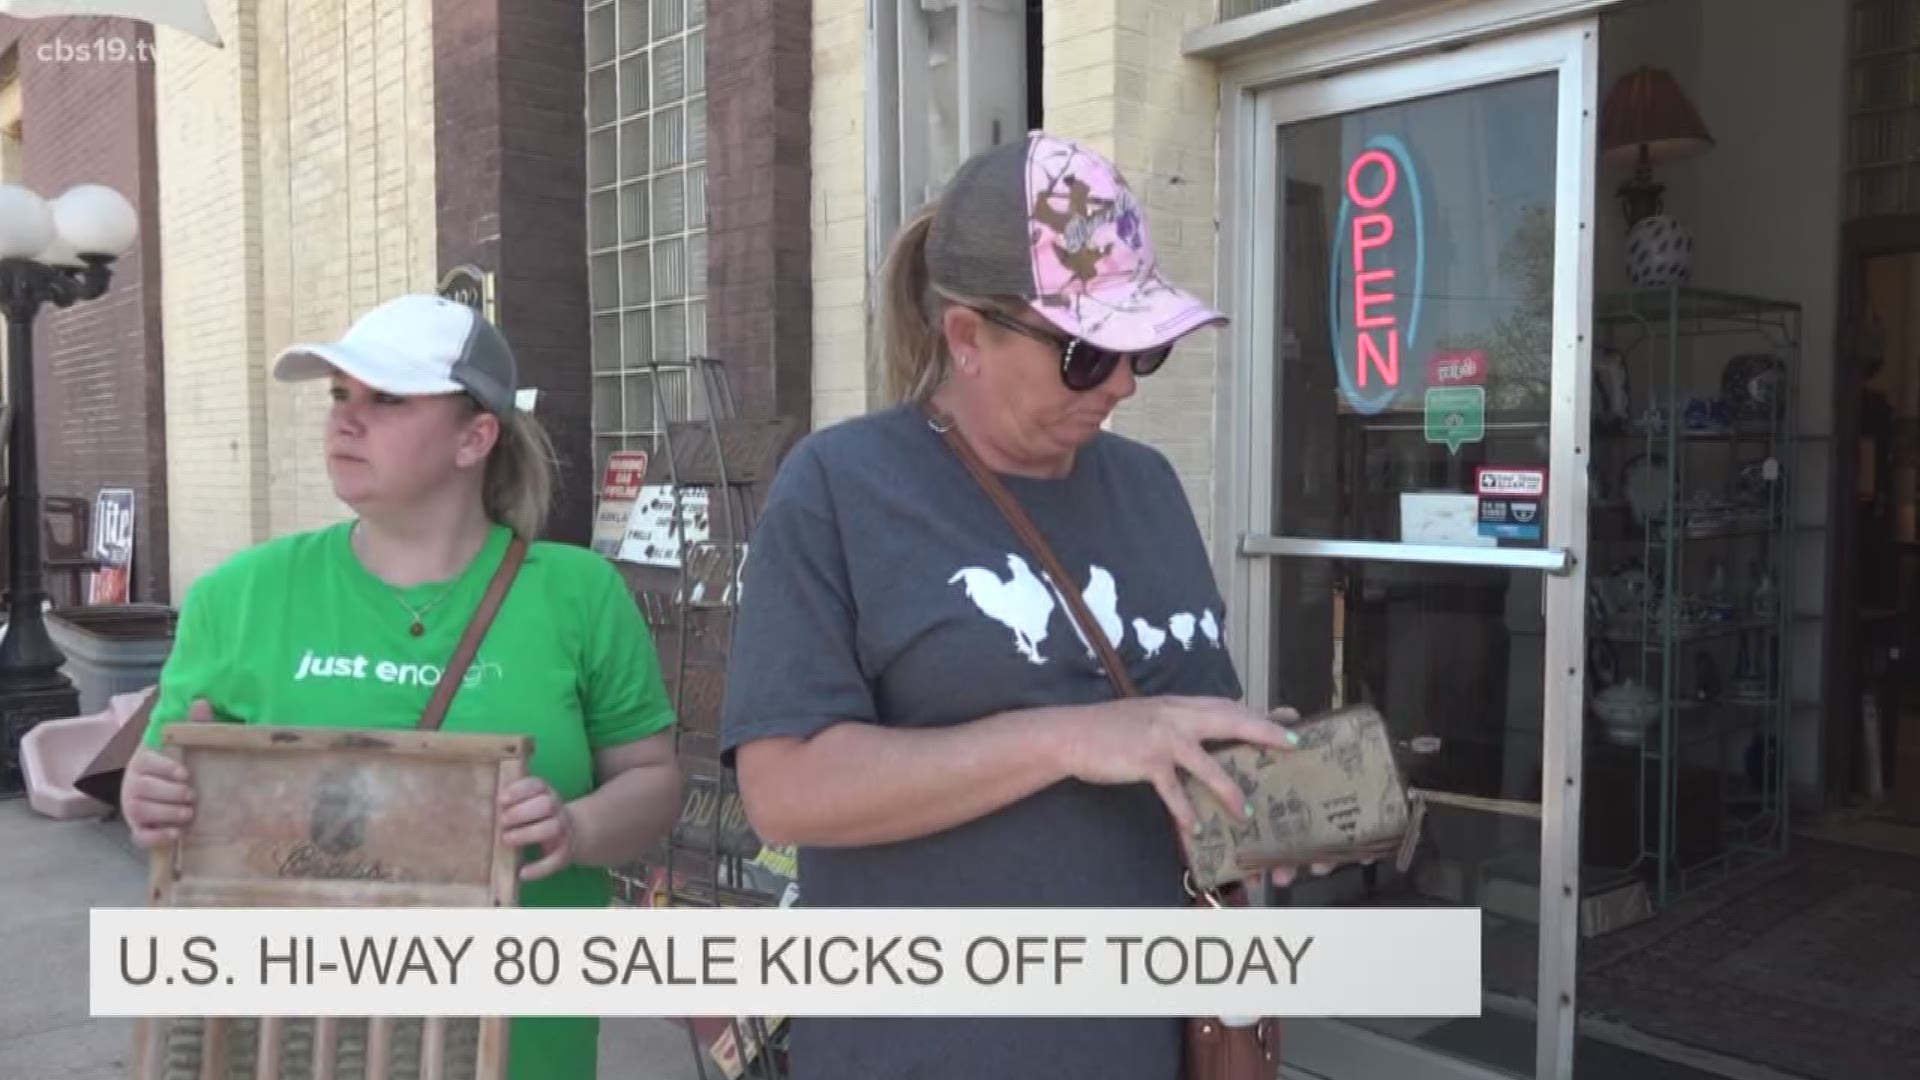 Hailed as "The biggest garage sale in America," the Hi-way 80 sale starts this weekend.